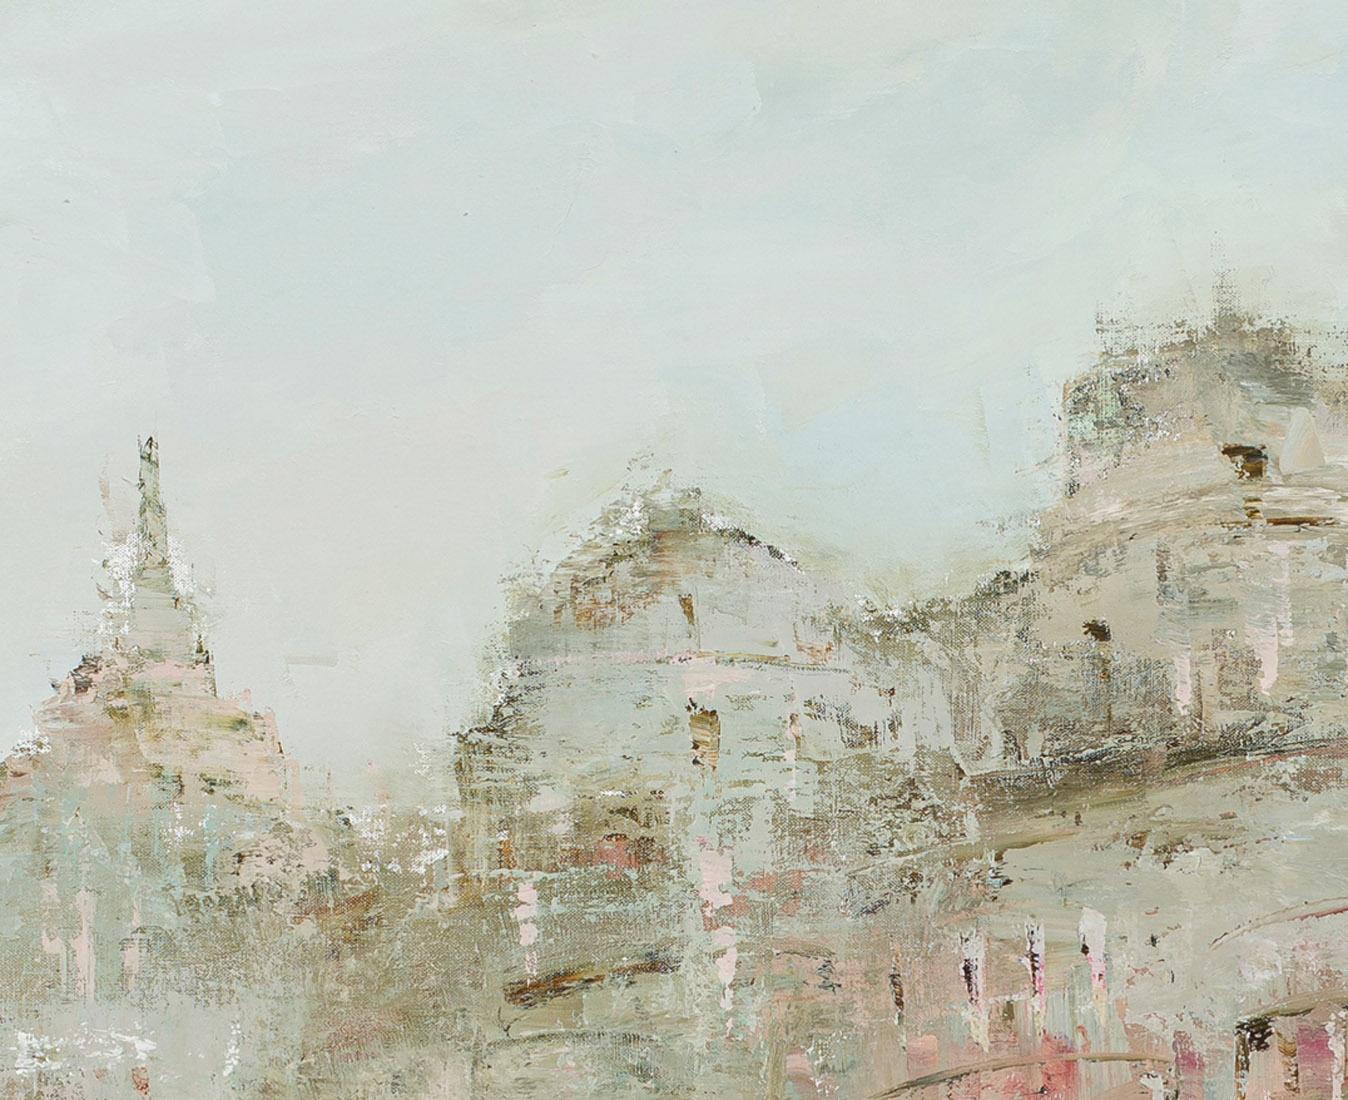 Shadows Lie Like Wine within a Cup - Gray Abstract Painting by France Jodoin